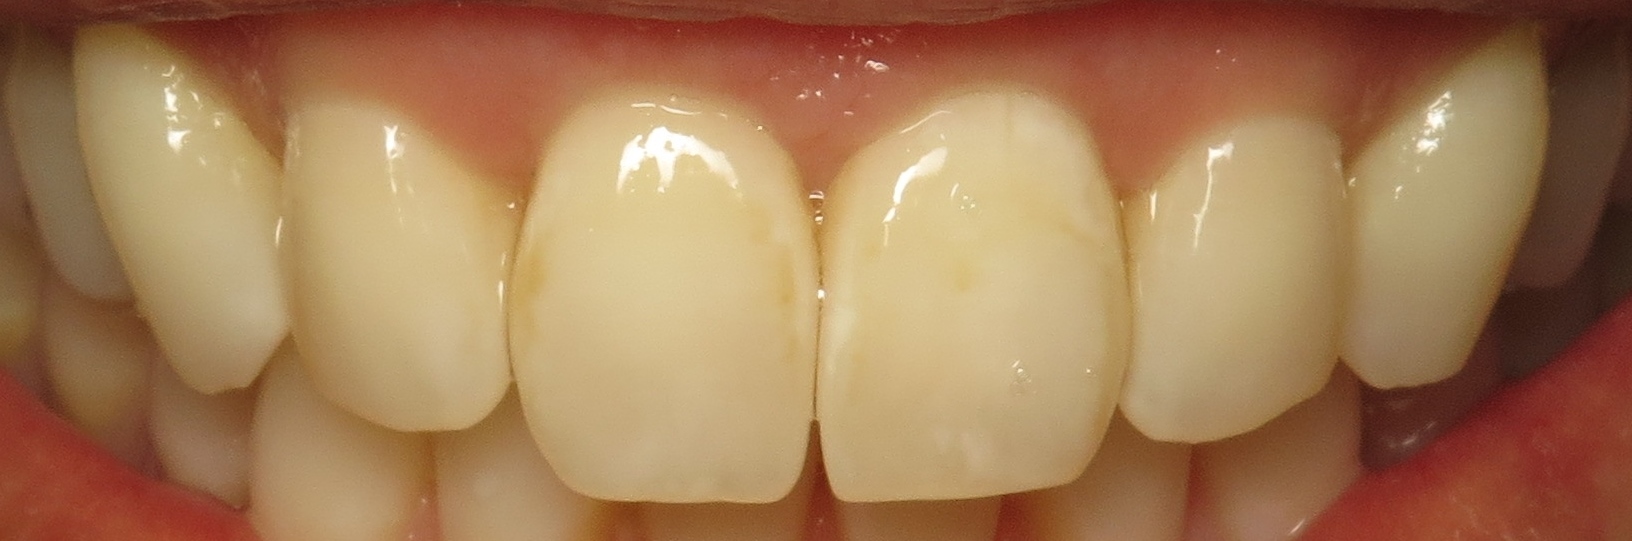 Thousand Oaks Family Dentistry - Golden Proportion Case 1 retracted smile.JPG